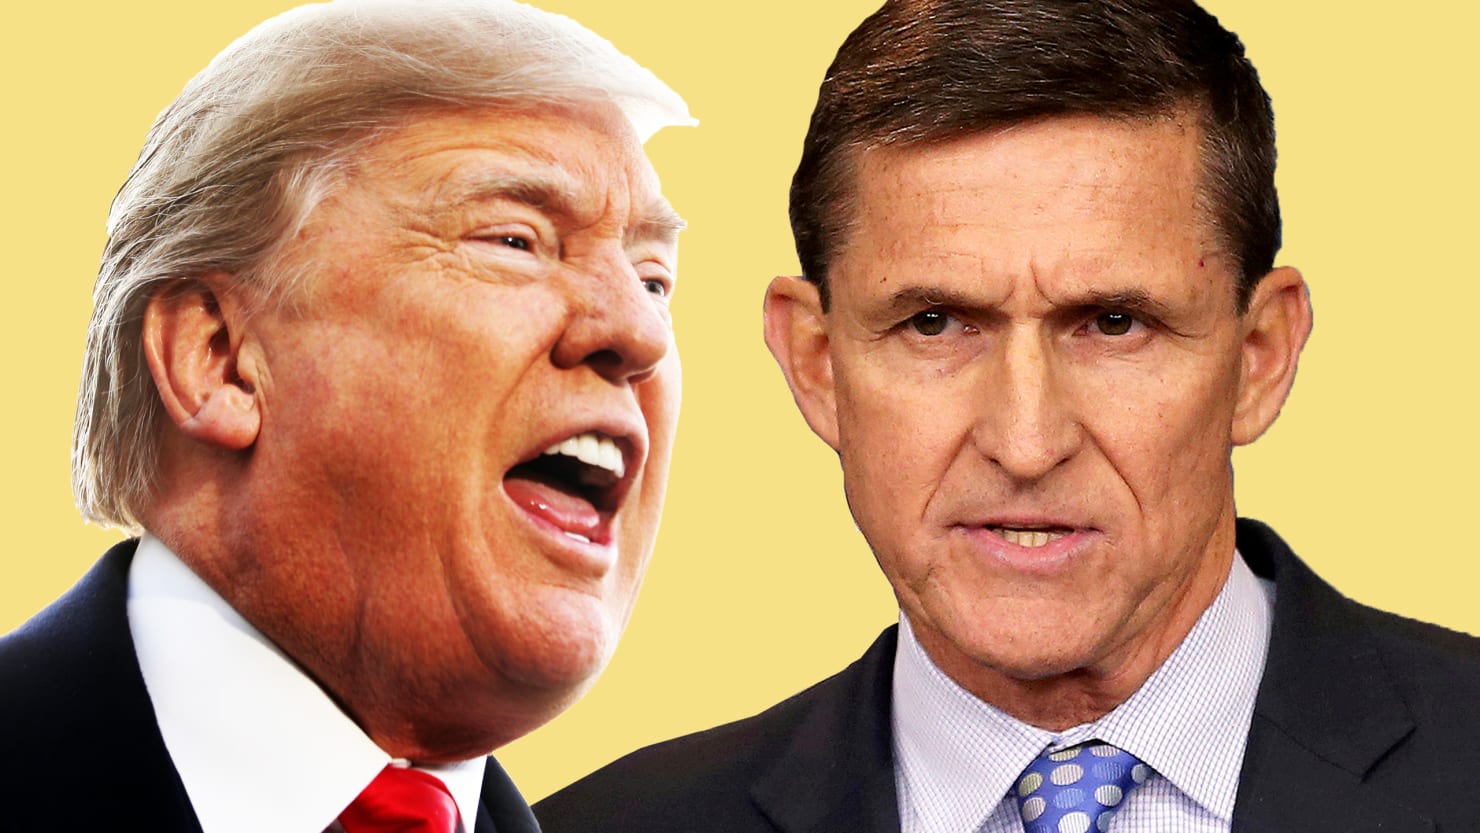 Who Wrote That Flynn Tweet, Trump or Dowd? It Hardly Matters—Both ...